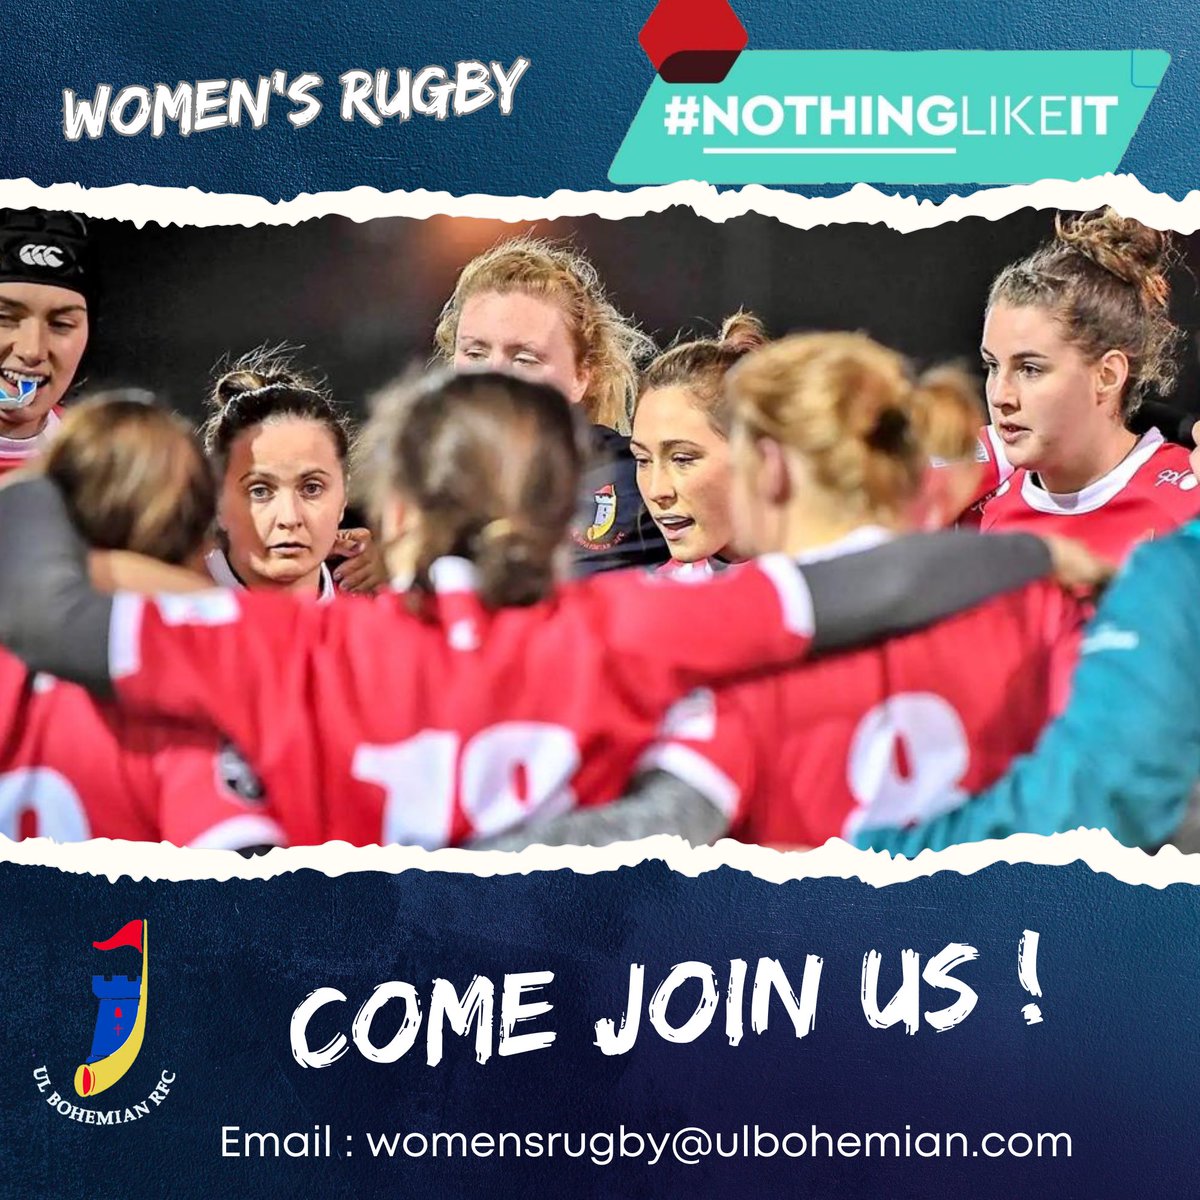 Looking at college in Limerick? 🎓Moving for work? 👩‍💼Interested in playing rugby? 🏉 We are looking for experienced players, young players and beginners to join us. Contact Carol on 📞 087 6805962 or Email womensrugby@ulbohemian.com #NothingLikeIt